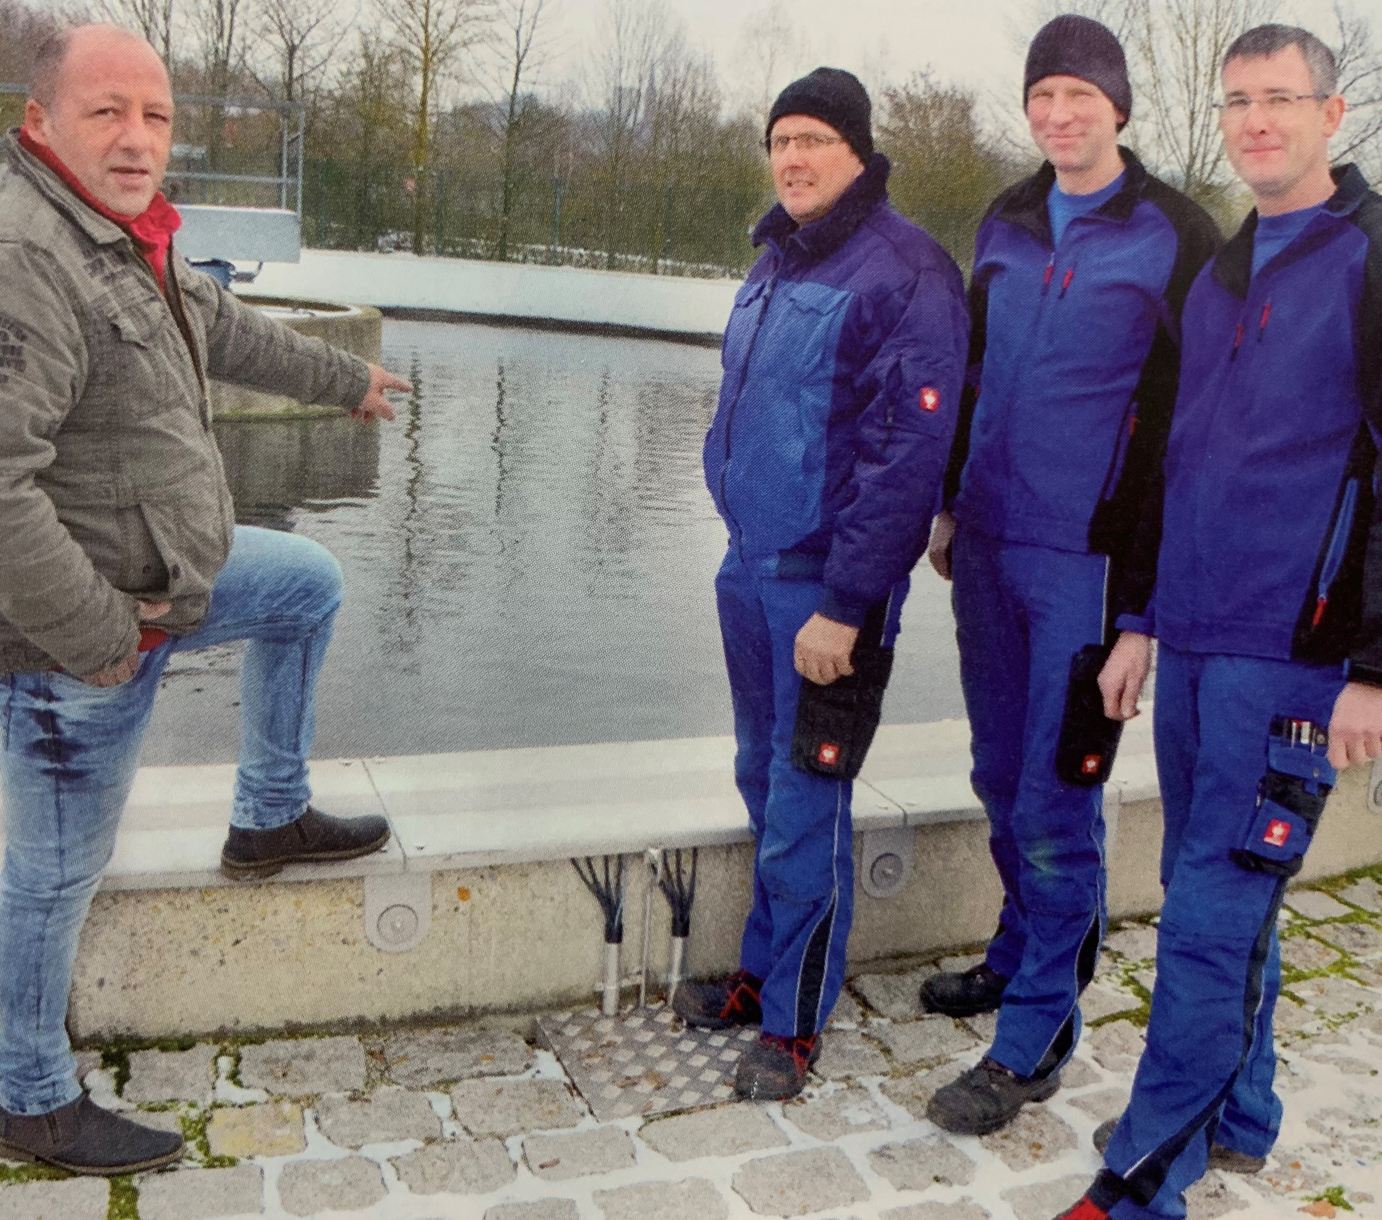 Bad Abbach treatment plant team and VTA Area Manager Werner Schrödl